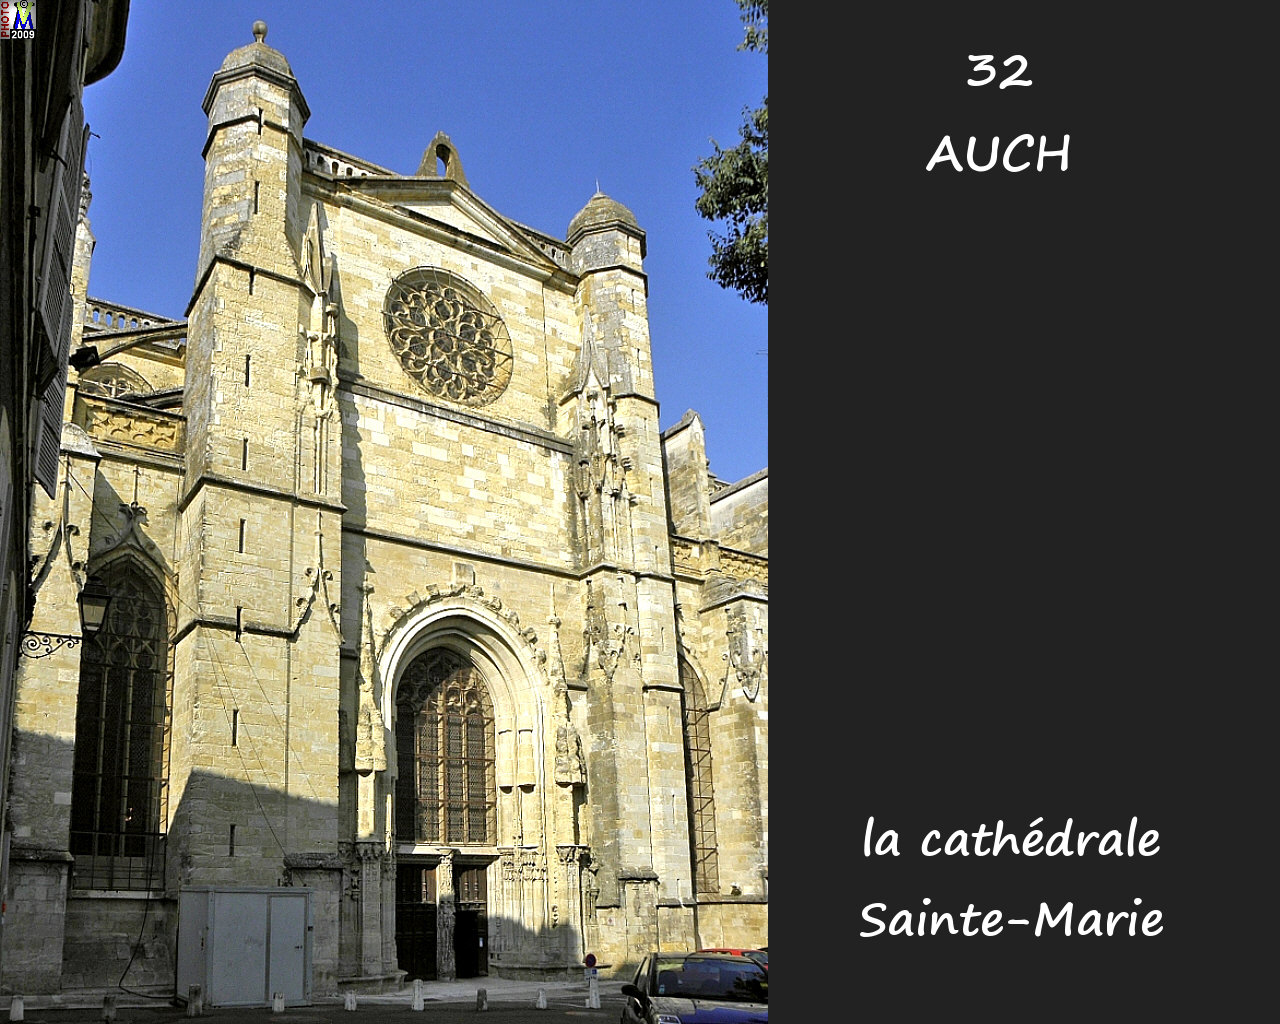 32AUCH_cathedrale_106.jpg